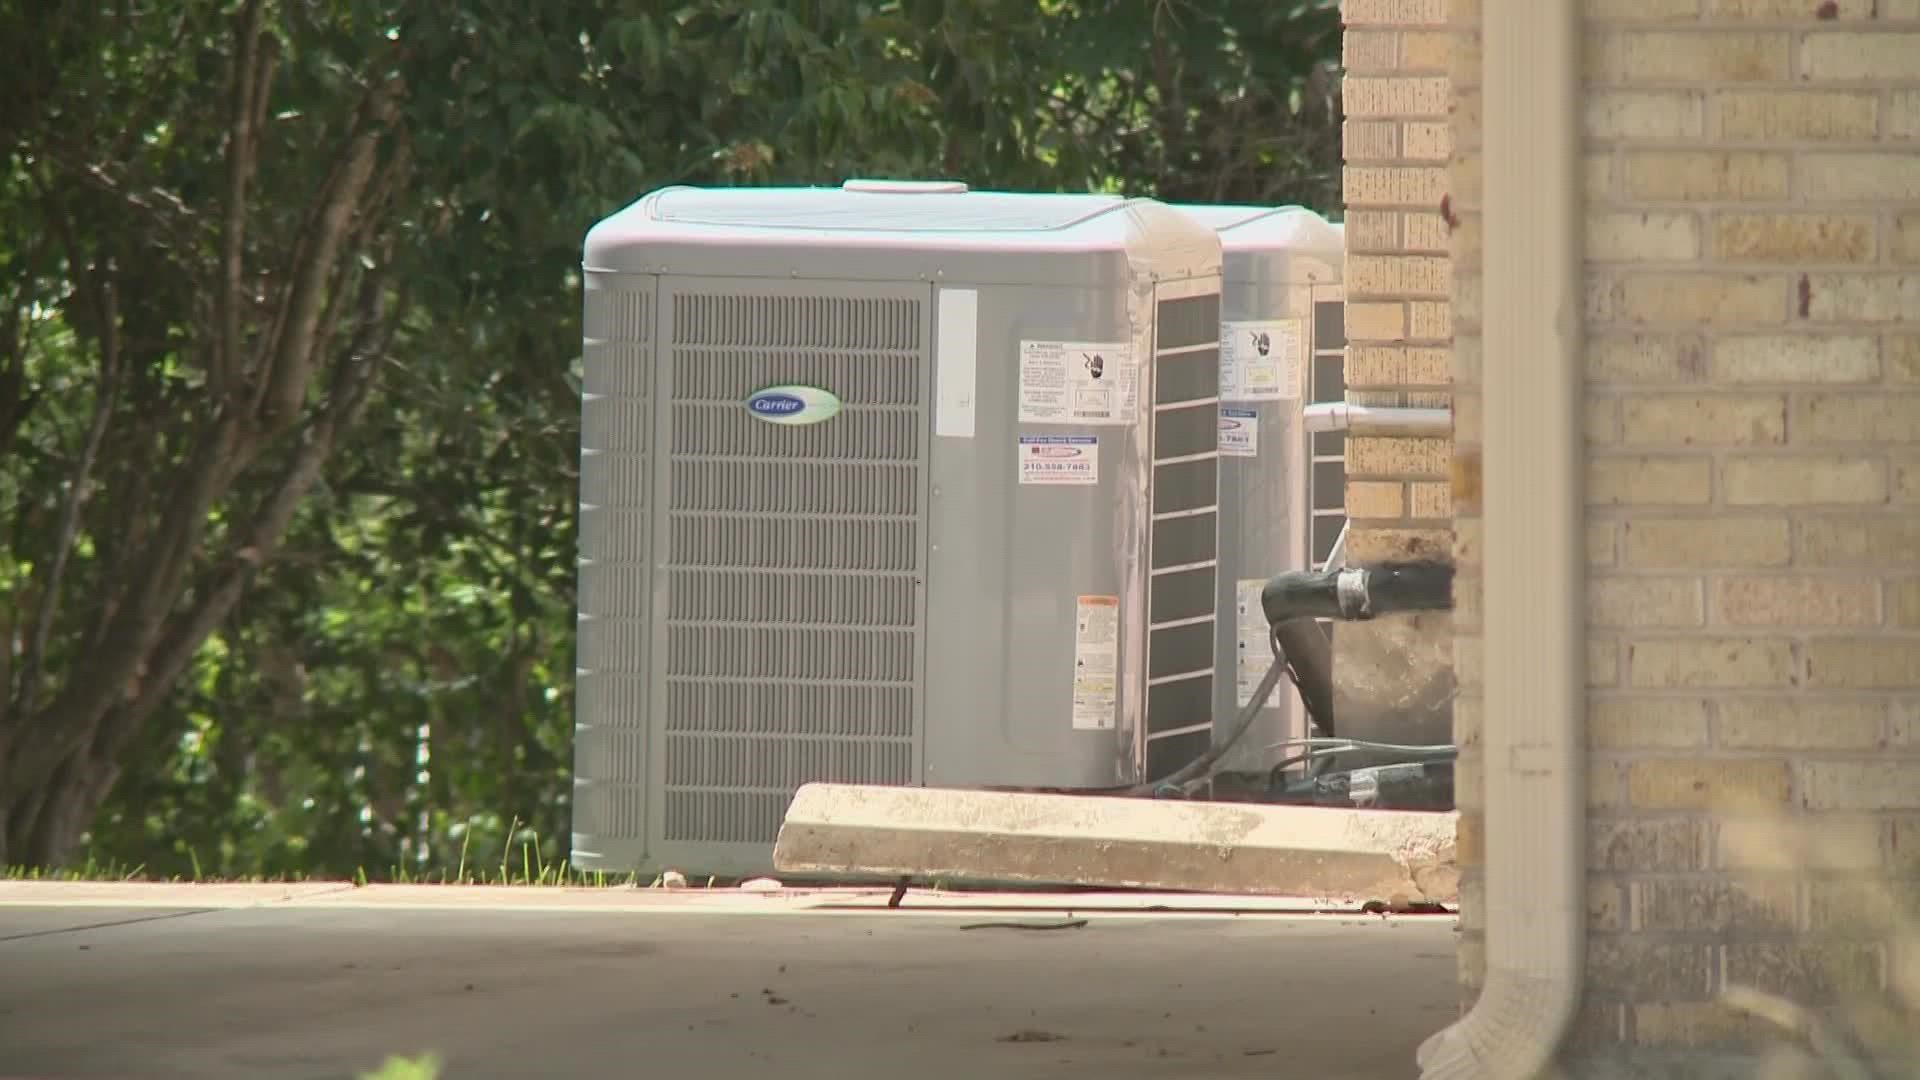 Texans are not only feeling the heat this summer, but energy prices are also scorching our pocketbooks. There may be little reprieve in coming summers.